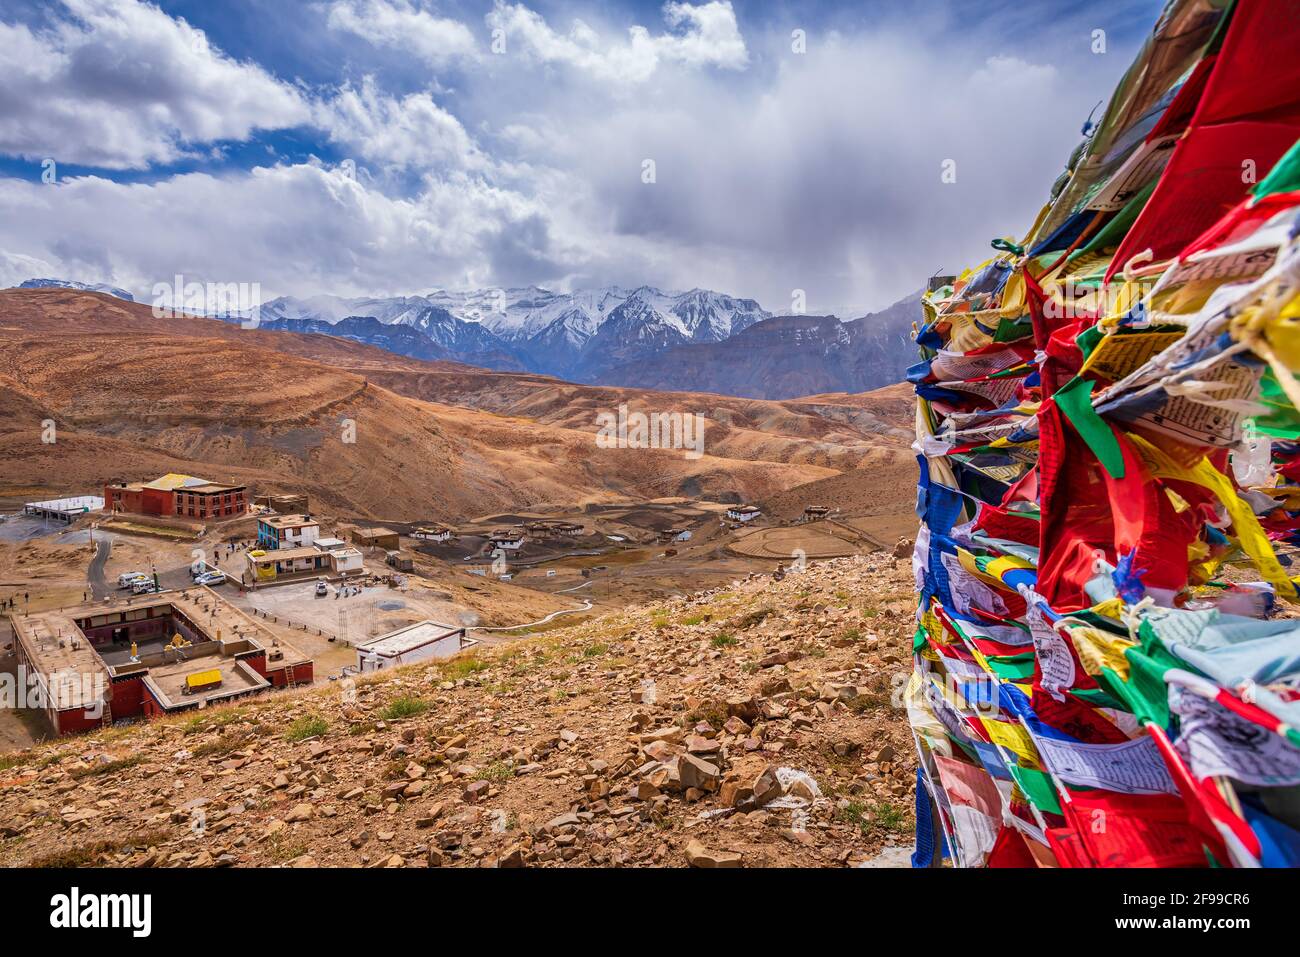 Colorful Prayer Flags Flying In Winds With Komic Village Nestled